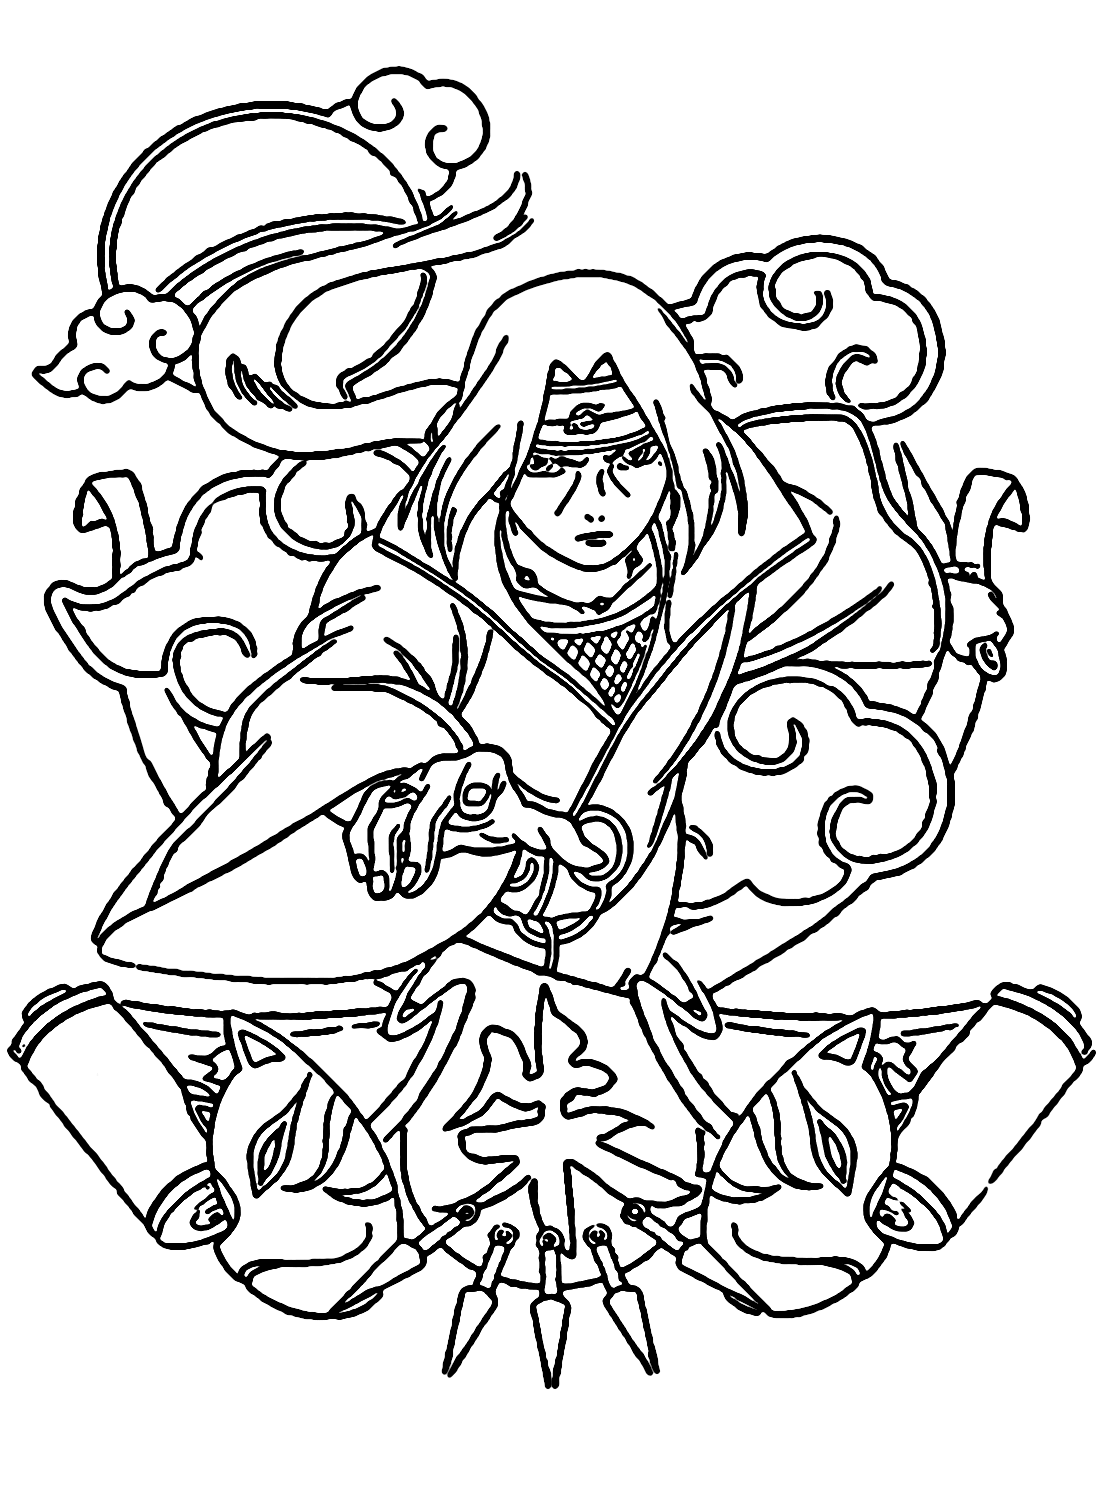 Uchiha itachi coloring pages